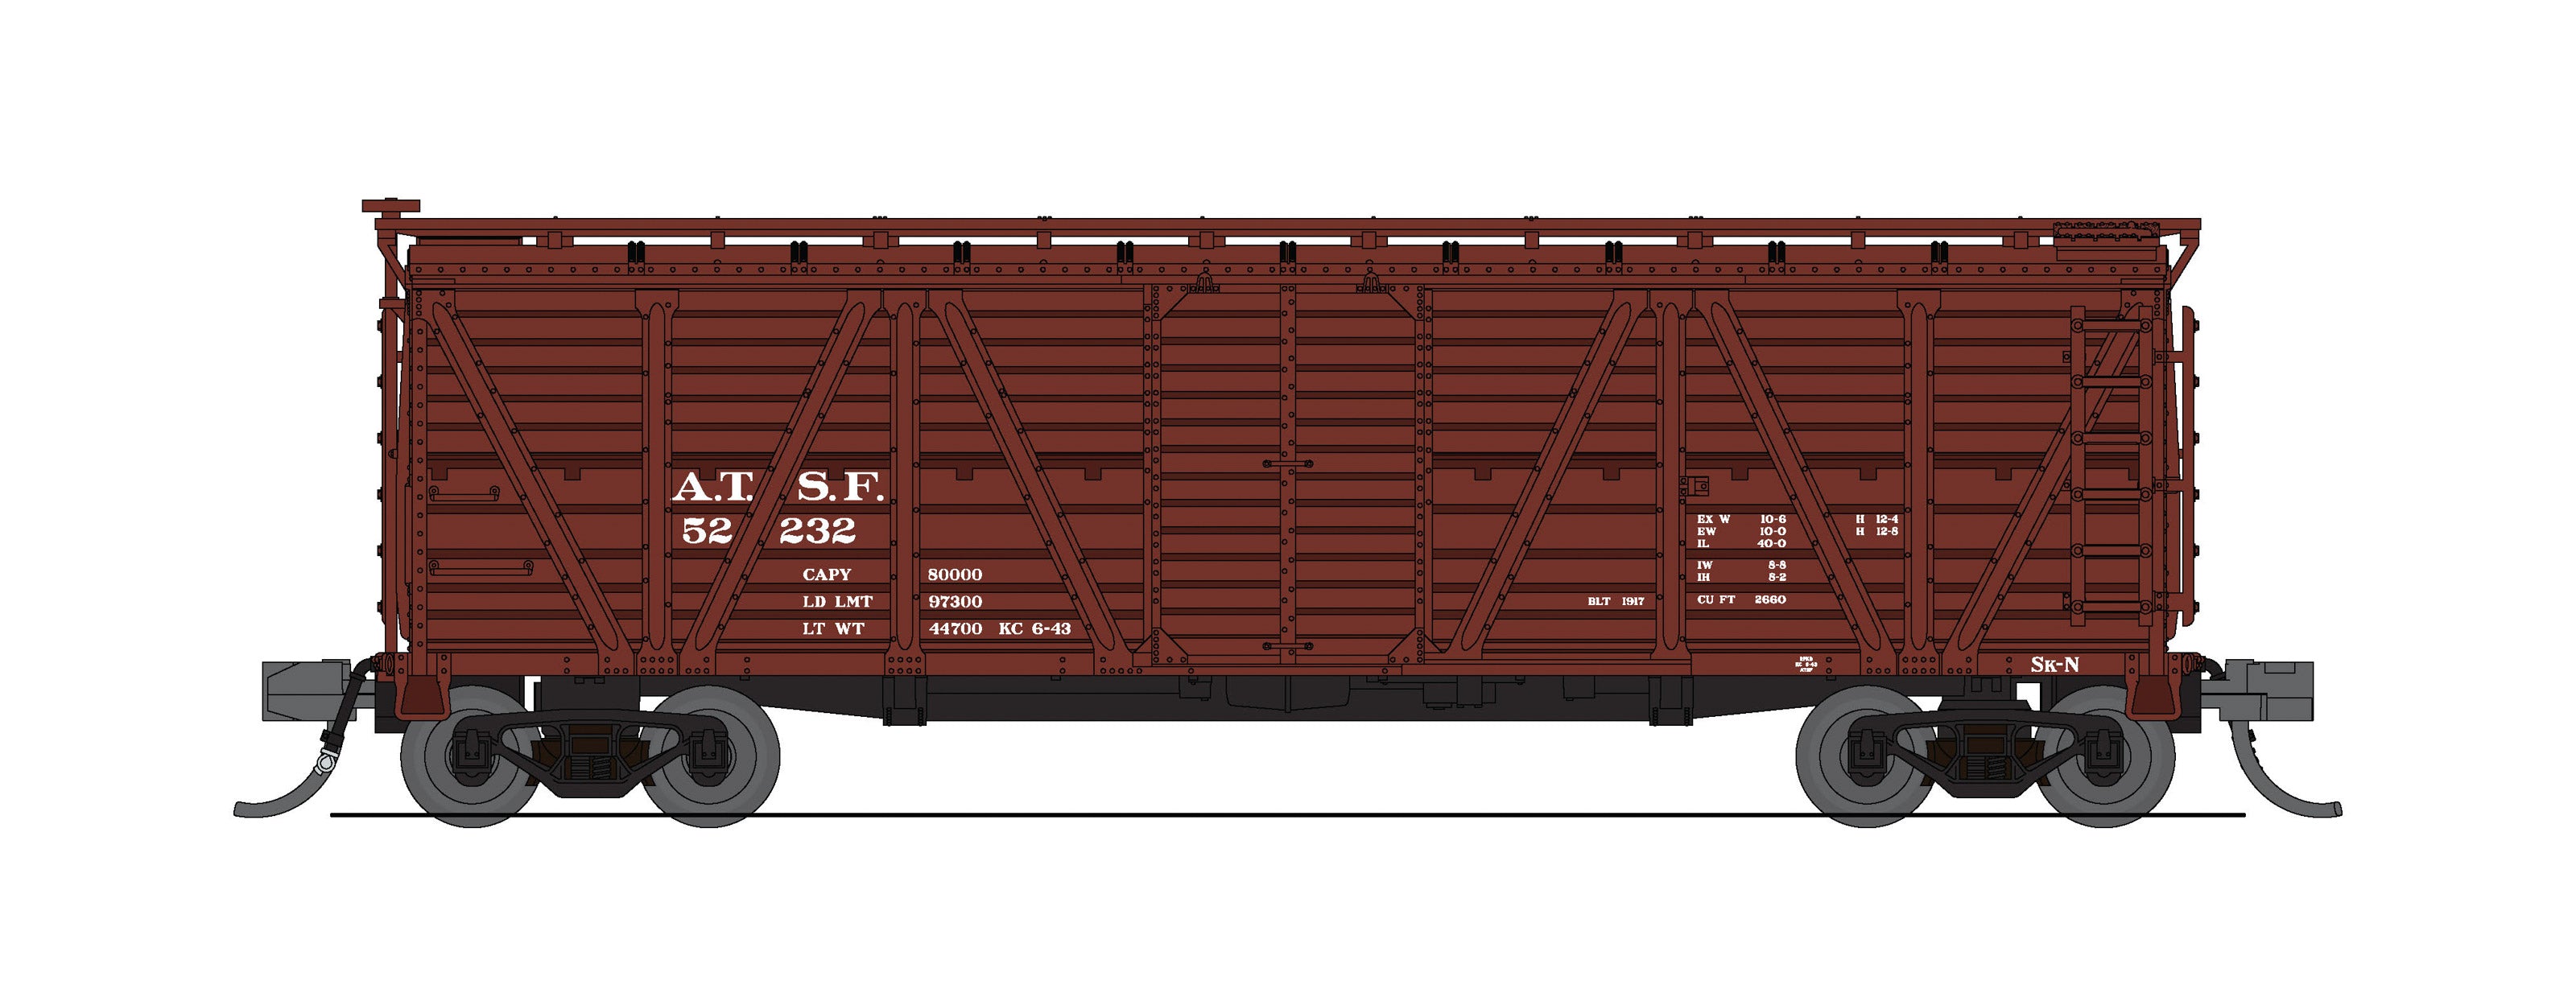 8450 40' Wood Stock Car, ATSF 52232, Cattle Sounds, N Scale